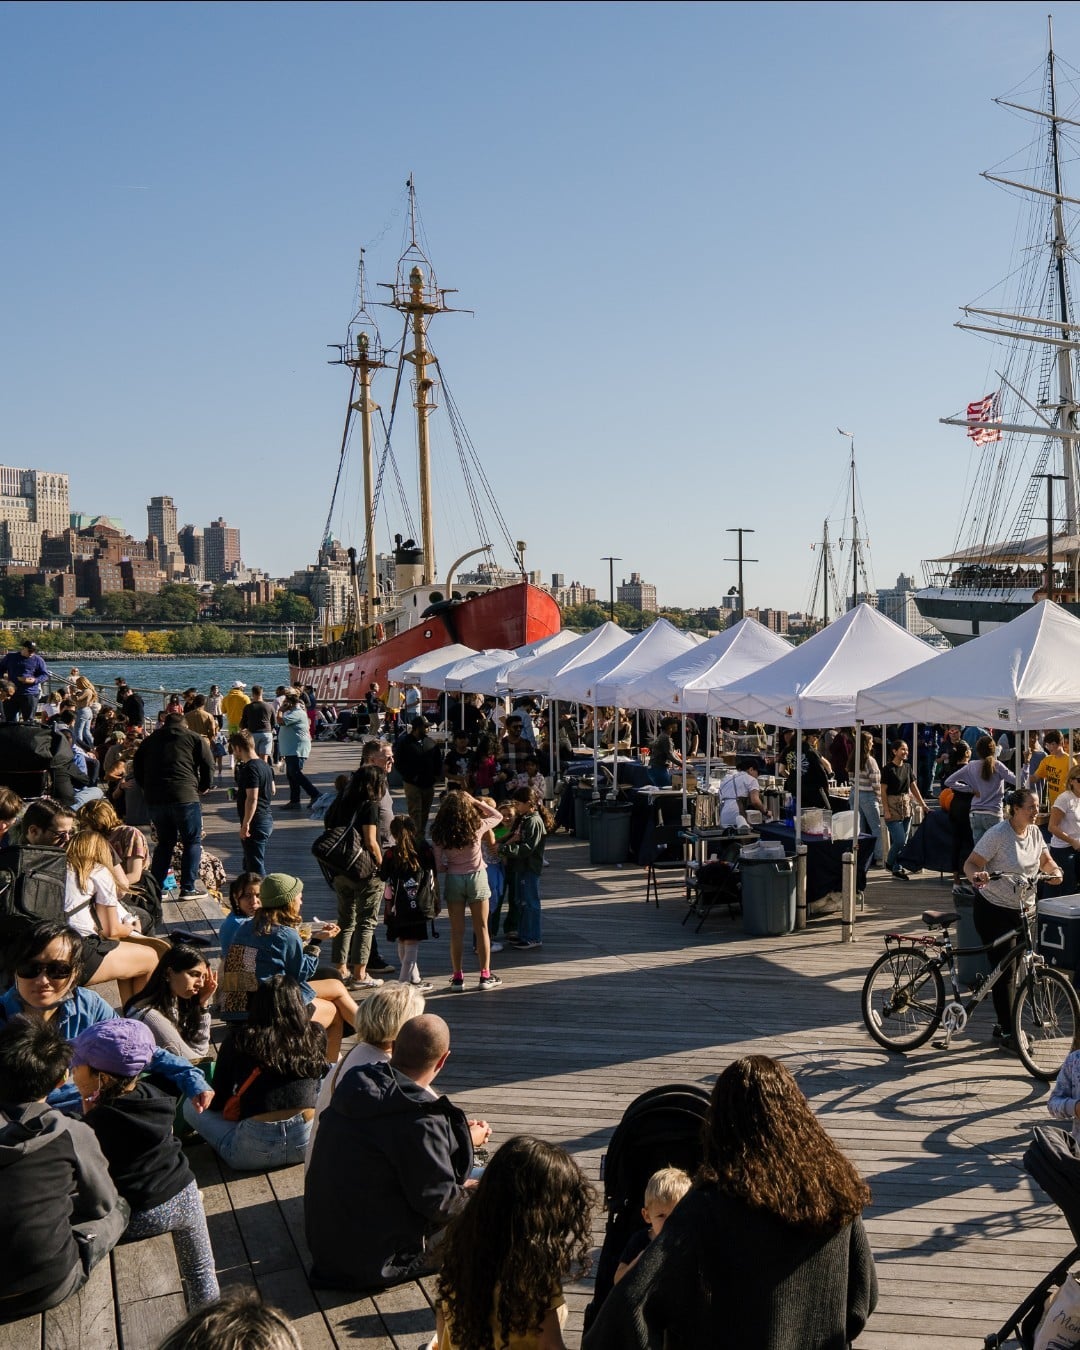 Saturday is the big day! Join us at for the annual @tasteoftheseaport event to celebrate food, community and education while fundraising for local schools. 

More than 50 restaurants and community partners will come together to showcase the culinary diversity of lower Manhattan and support the area’s local schools.

🗓️Sat, 9/23
 12- 4pm
Seaport Square
Grab your ticket ➤ link in bio